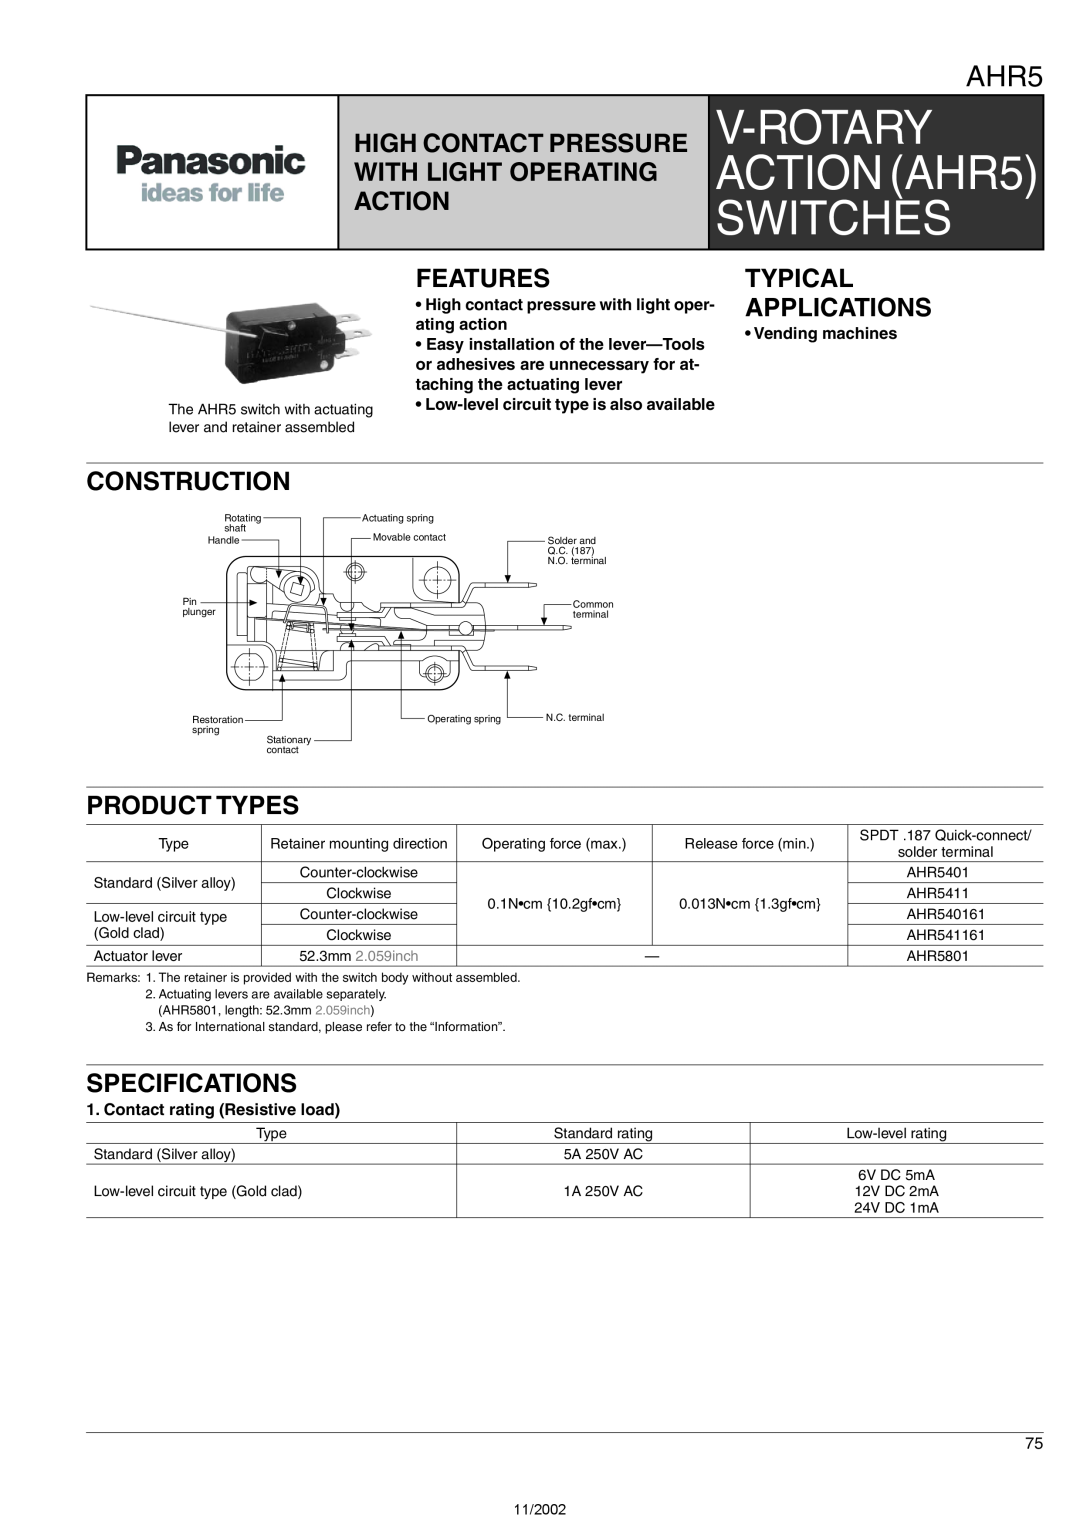 Panasonic AHR5 specifications High Contact Pressure With Light Operating Action, Features, Typical Applications, Switches 